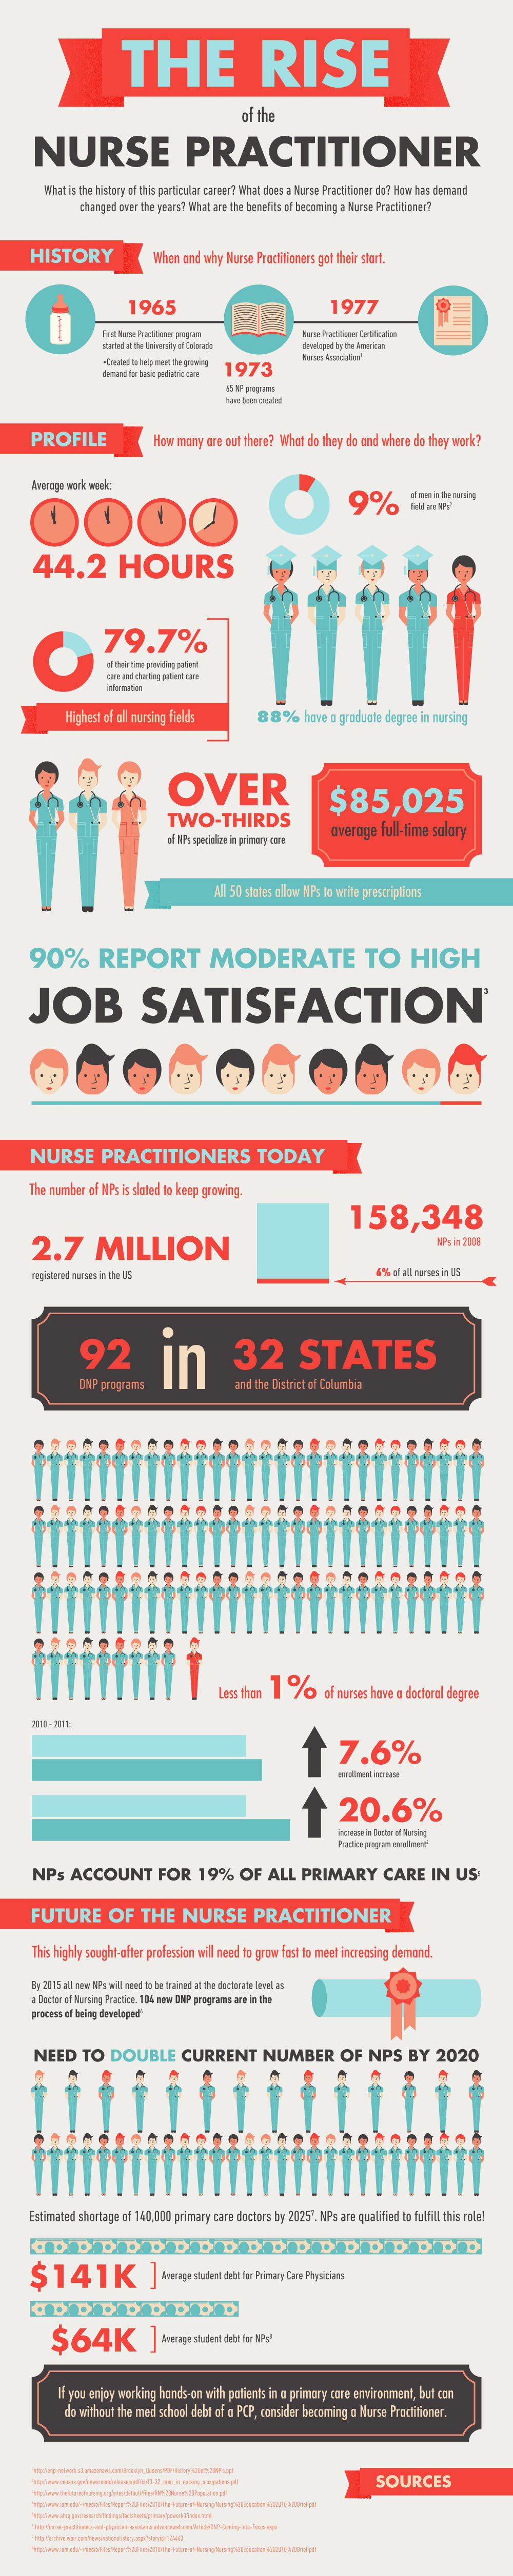 Rise of the Nurse Practitioner Infographic